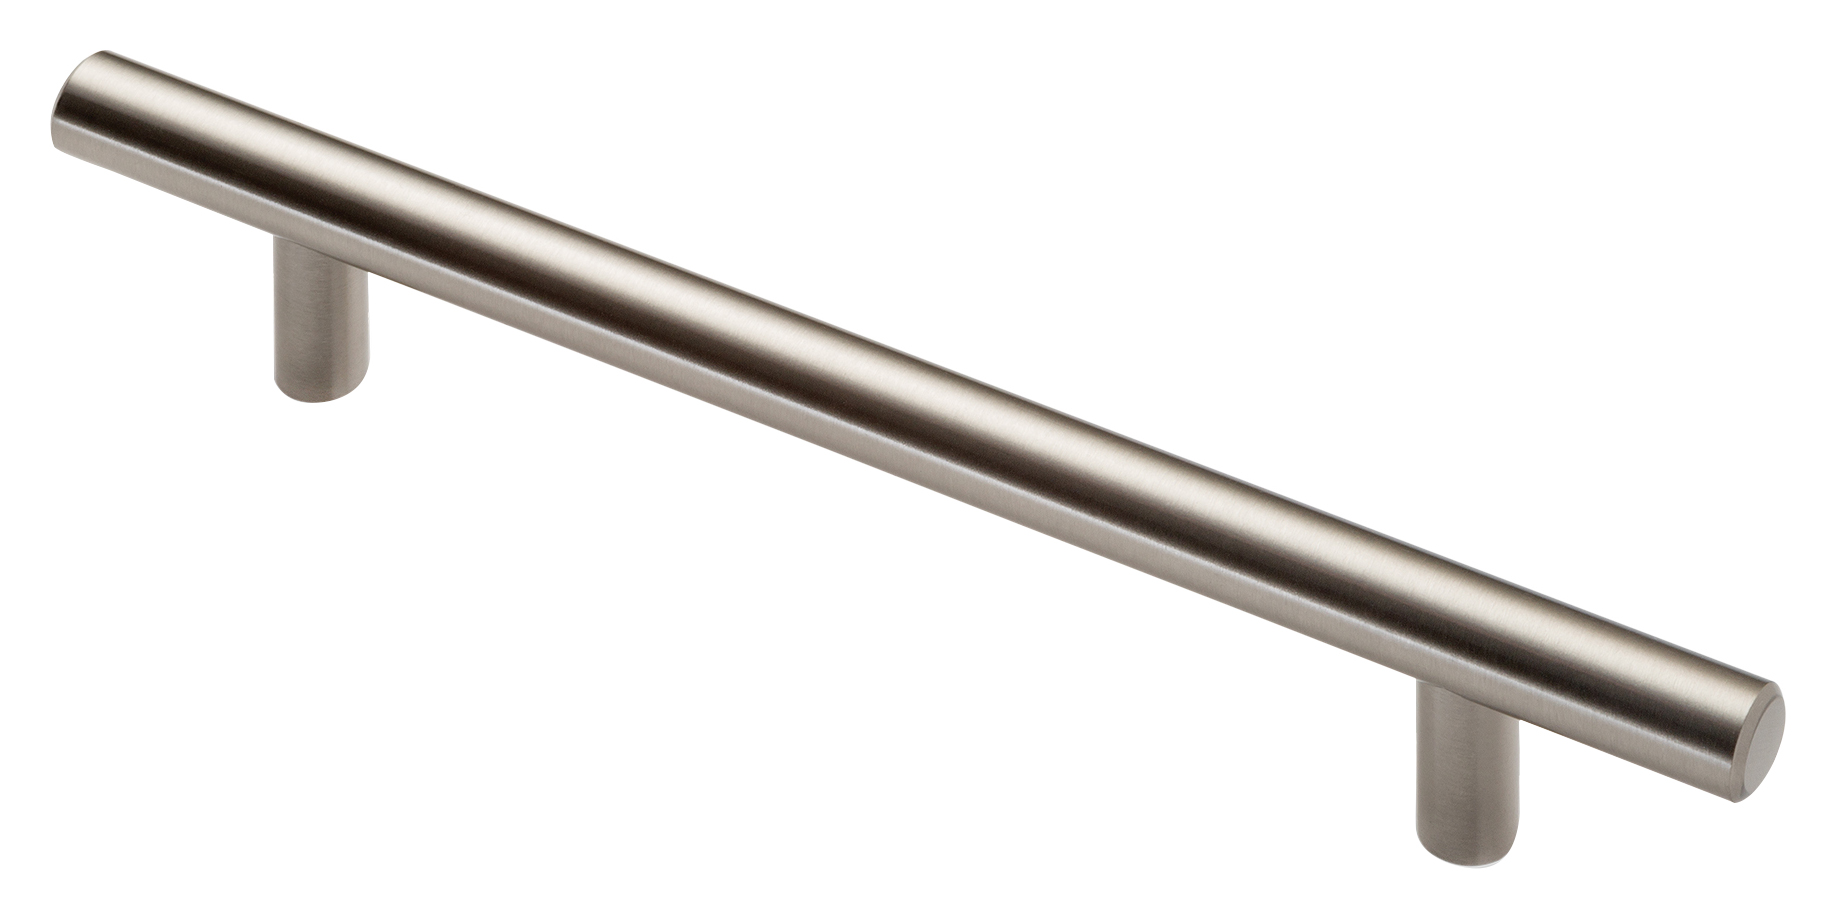 Duarti By Calypso Electra Stainless Steel Effect T-Bar Handle - 188mm